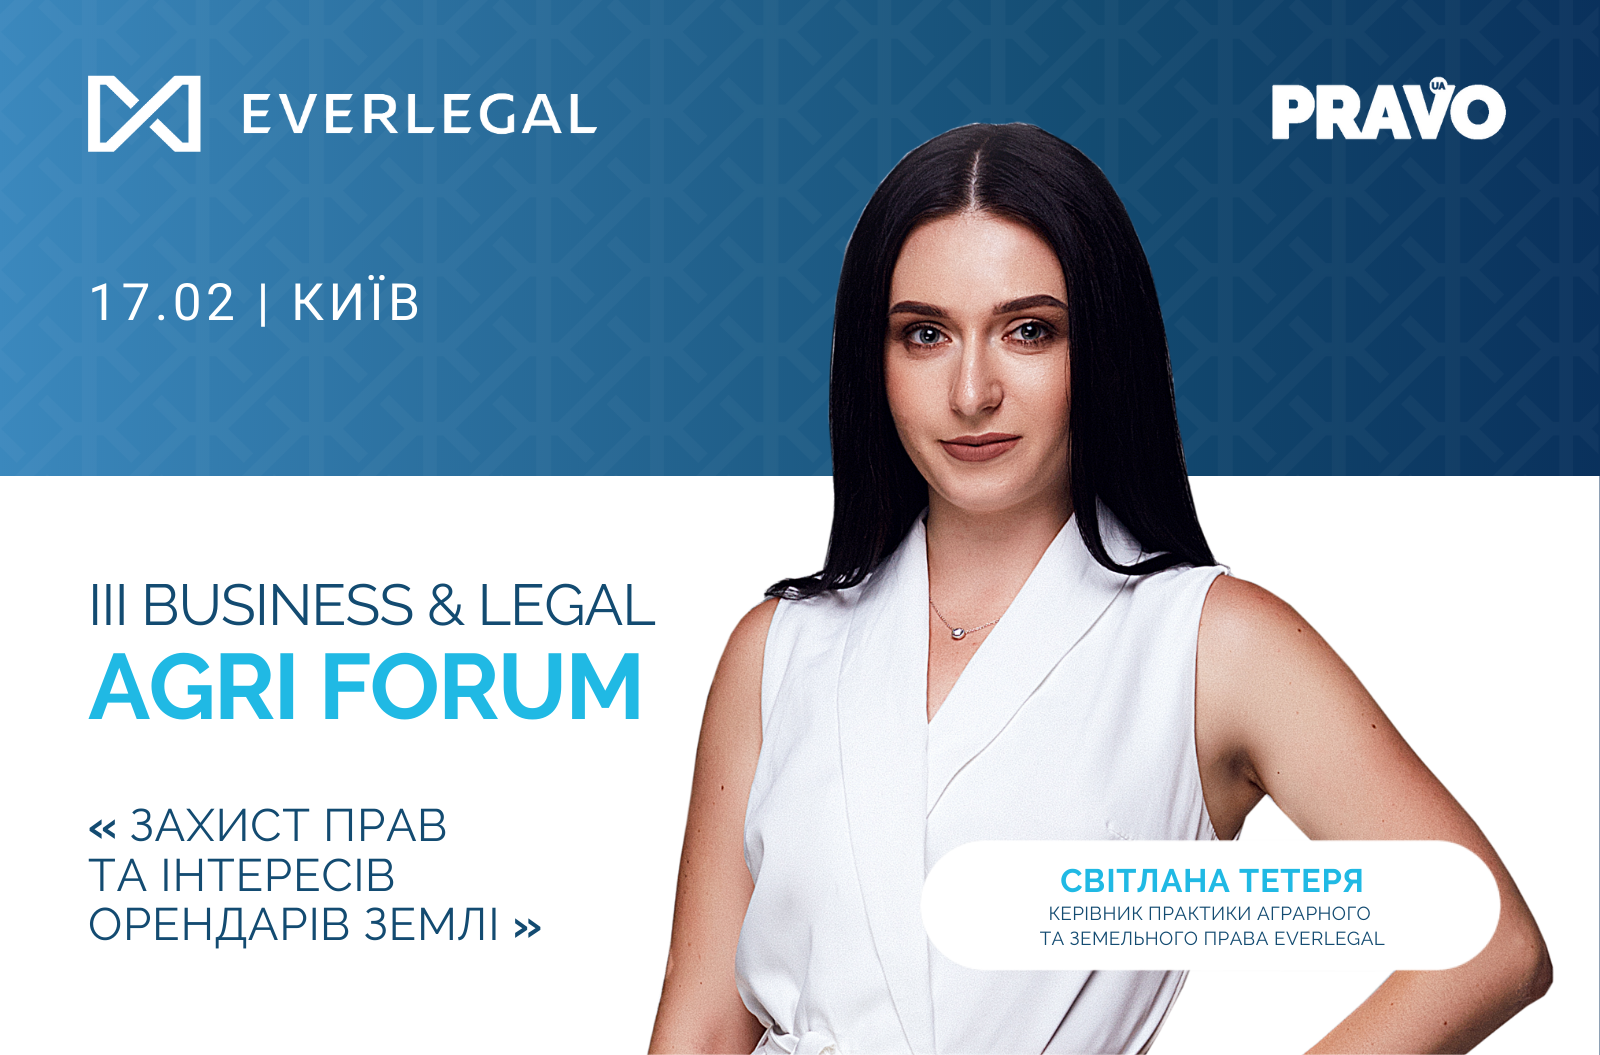 EVERLEGAL is inviting to the III Business & Legal Agri Forum